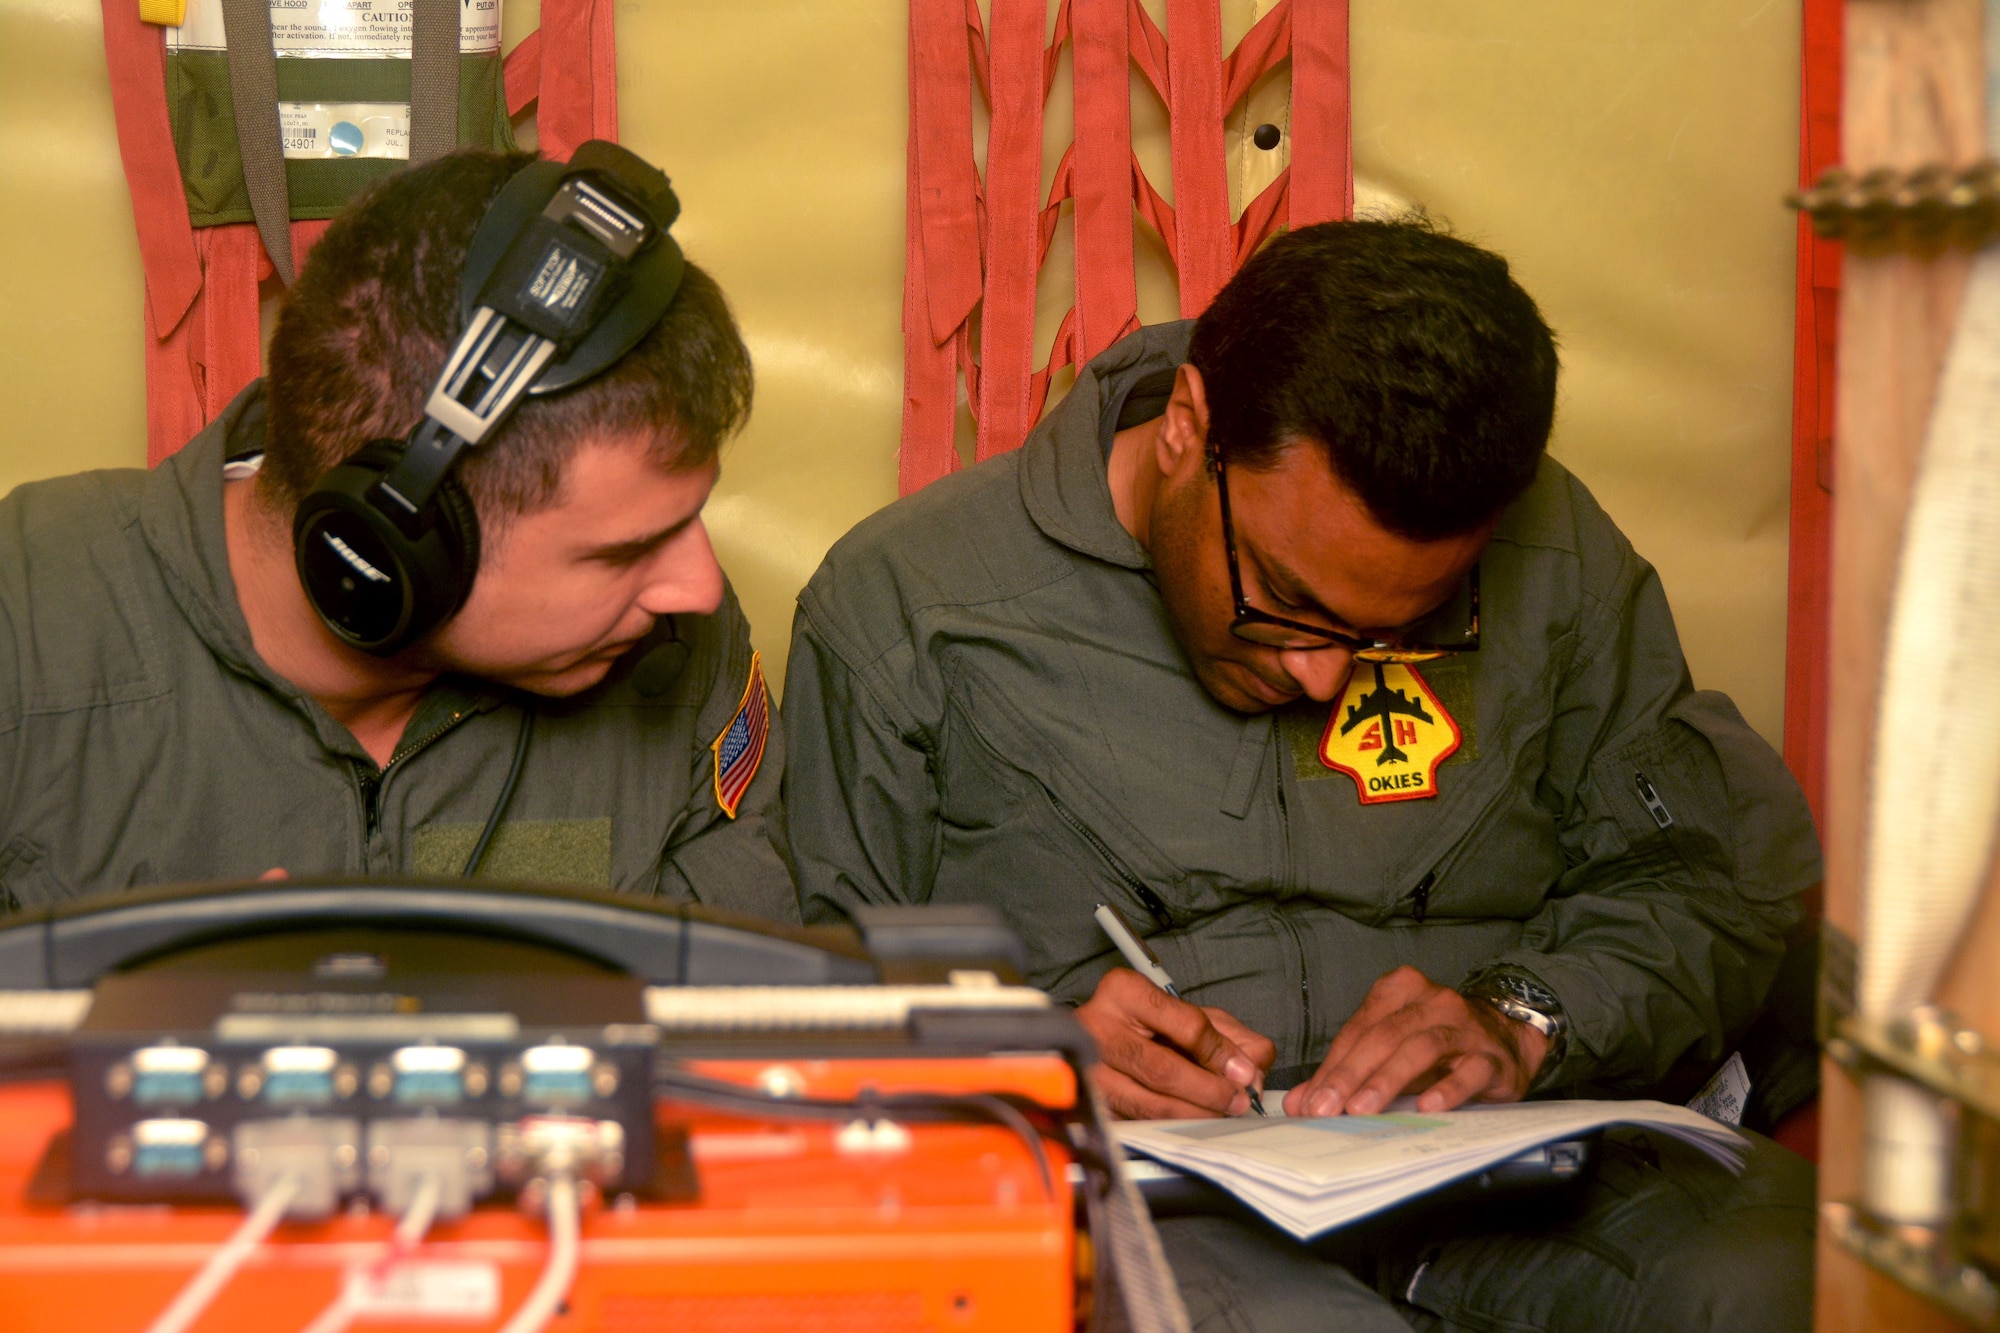 James Broches (left) and Swapnil Christian (right), Northrop Grumman flight test engineers at Eglin Air Force Base, Fla., monitor Large Aircraft Infrared Countermeasures system test equipment while in flight on a 507th Air Refueling Wing KC-135R Stratotanker from Tinker AFB, Okla., Nov. 29, 2017. Reserve Citizen Airmen flew the aircraft more than 60 times over a test range at Eglin AFB while a laser simulated incoming missiles for the LAIRCM system to detect and deflect. (U.S. Air Force photo/Tech. Sgt. Samantha Mathison)